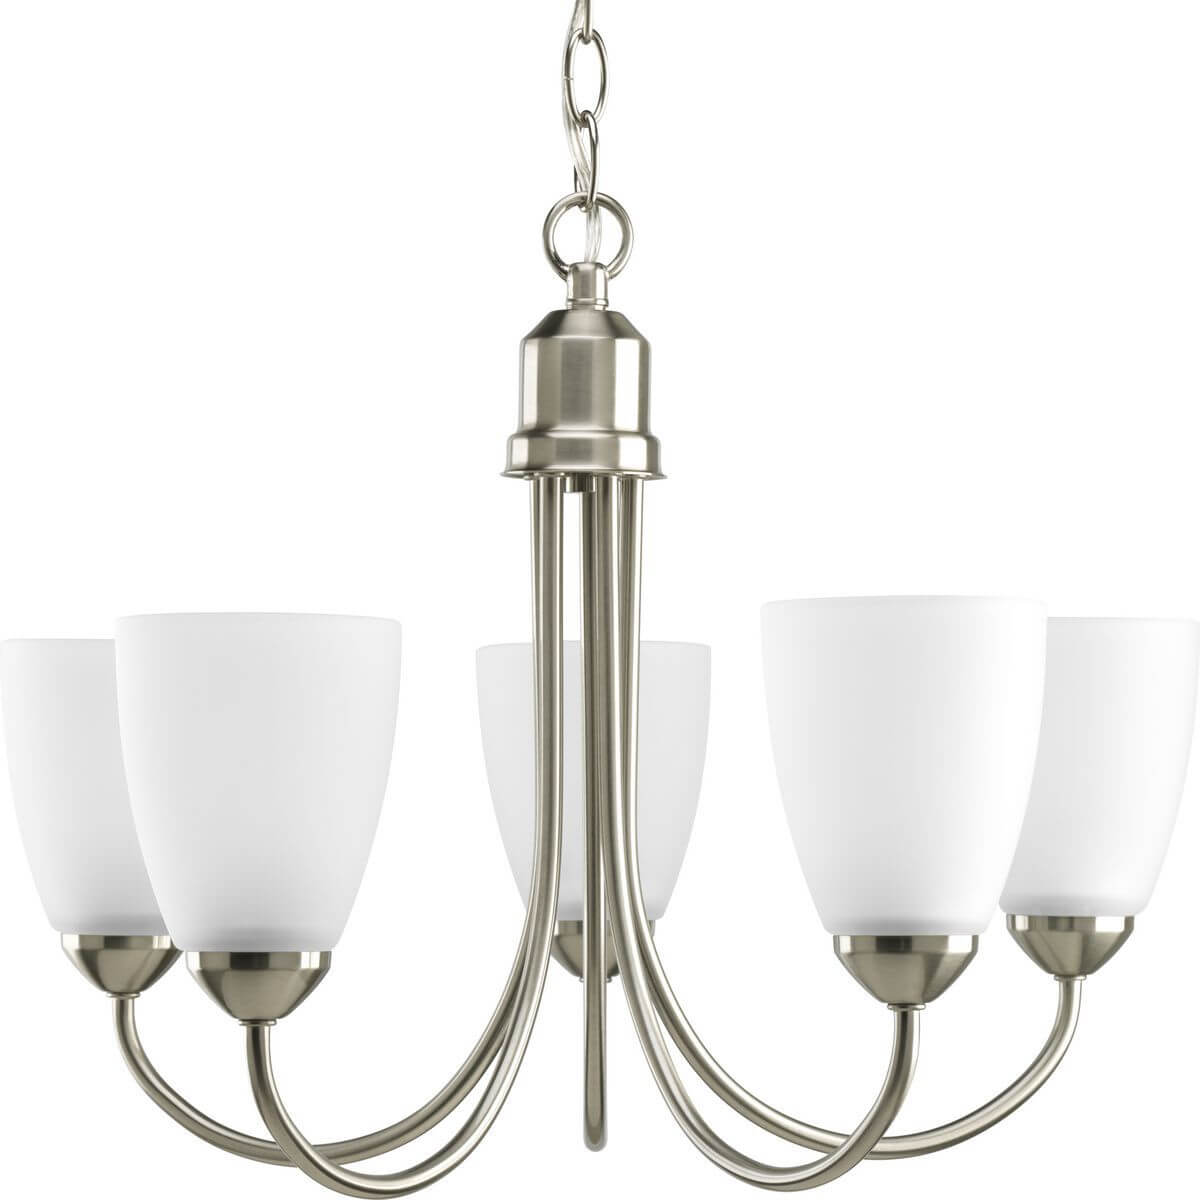 Progress Lighting Gather 5 Light 21 inch Chandelier in Brushed Nickel with Etched Glass P4441-09